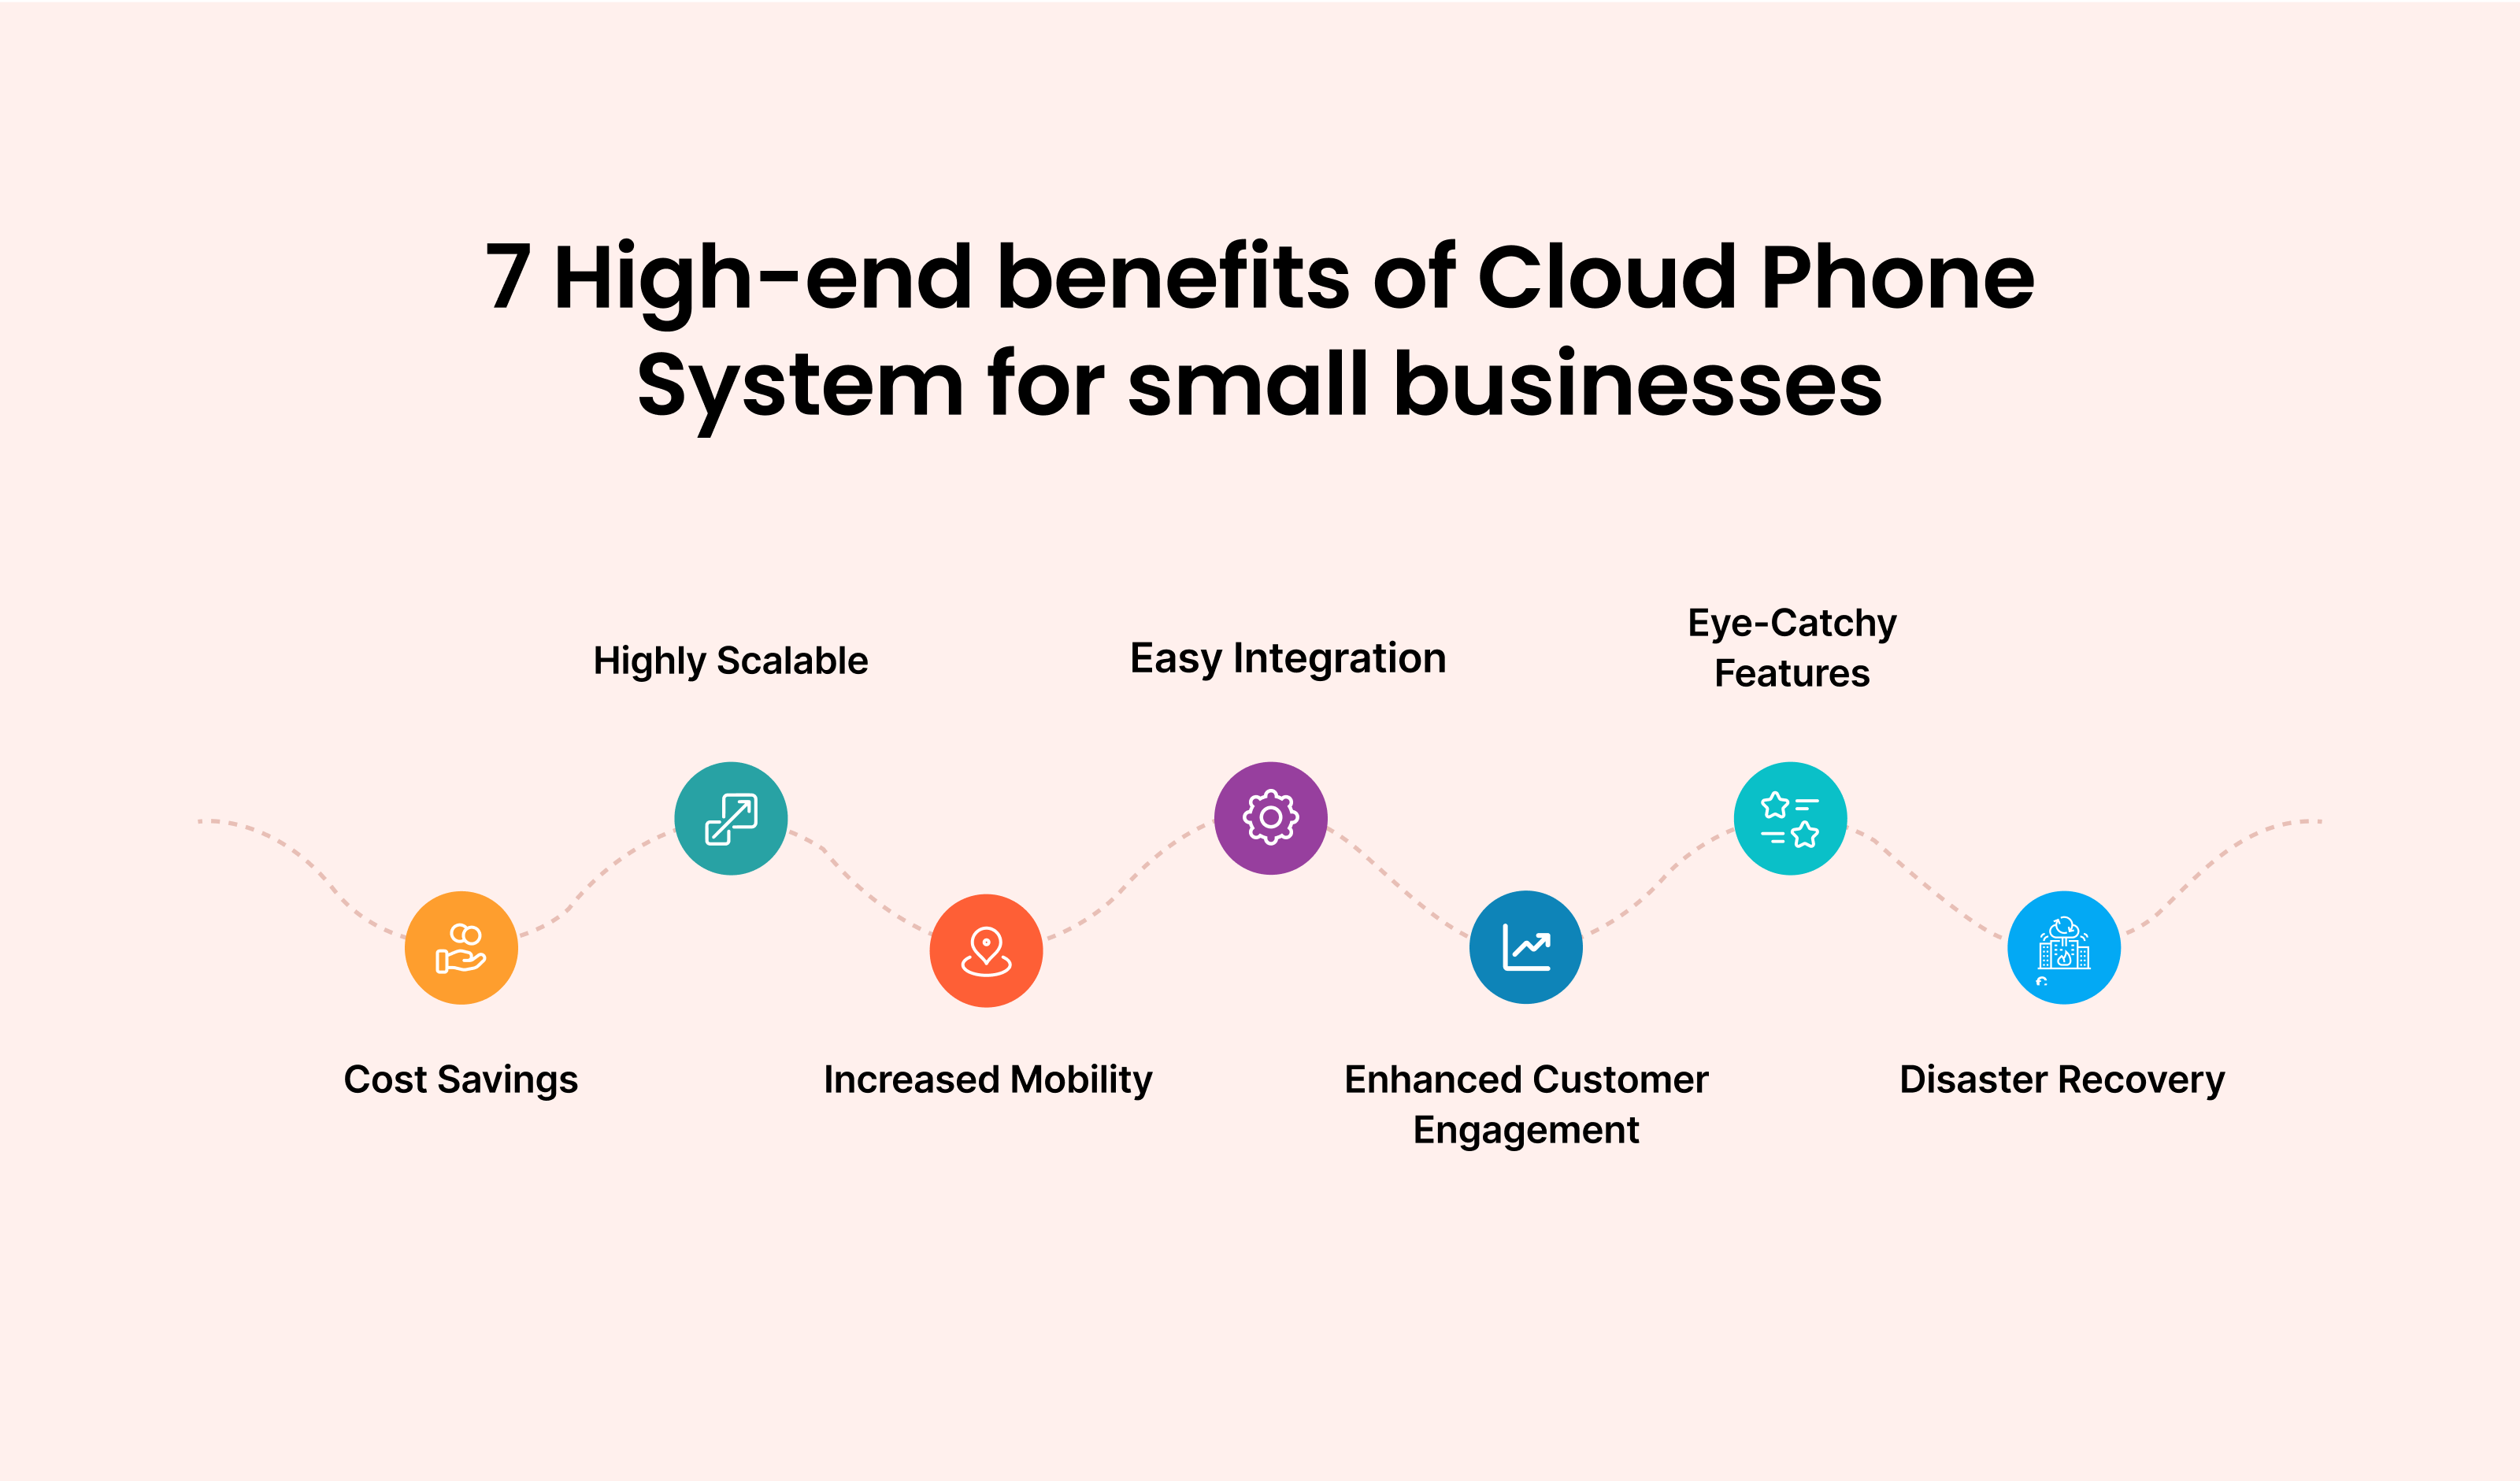 7 High-end Benefits of Cloud Phone System for Small Businesses: